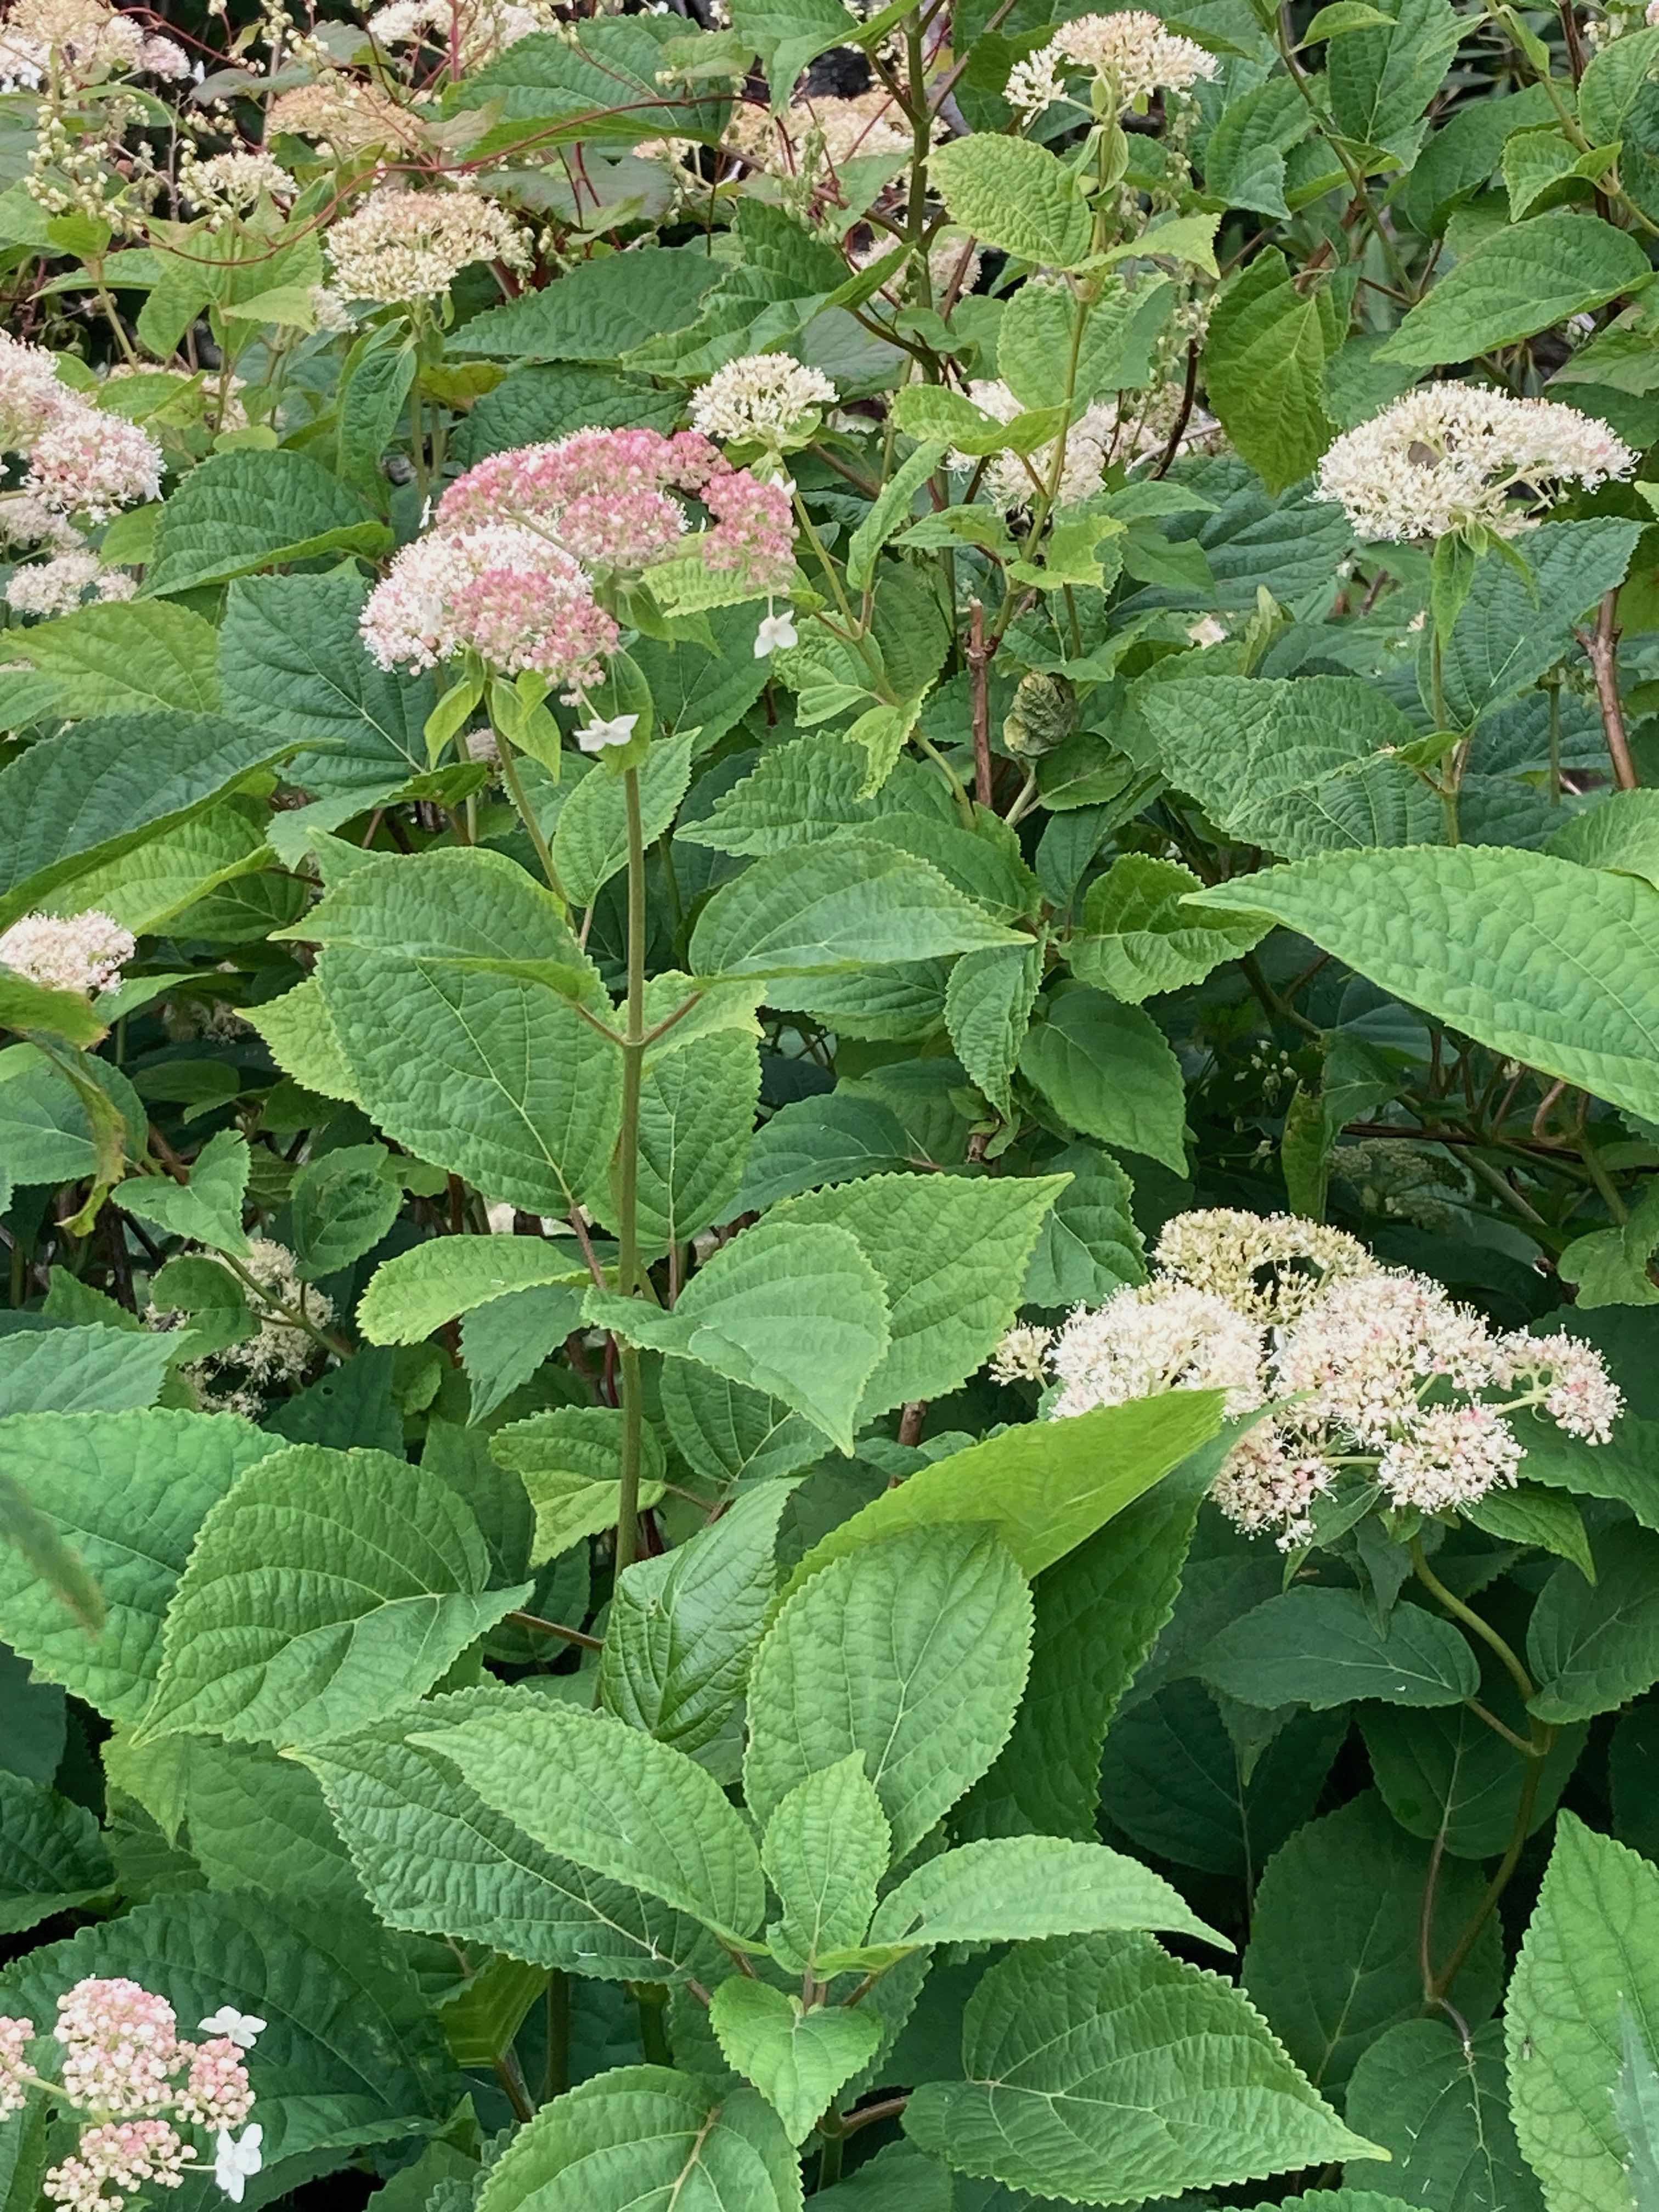 The Scientific Name is Hydrangea arborescens. You will likely hear them called Wild Hydrangea, Sevenbark. This picture shows the The inflorescence on this individual is not pure white but has some blush color. of Hydrangea arborescens